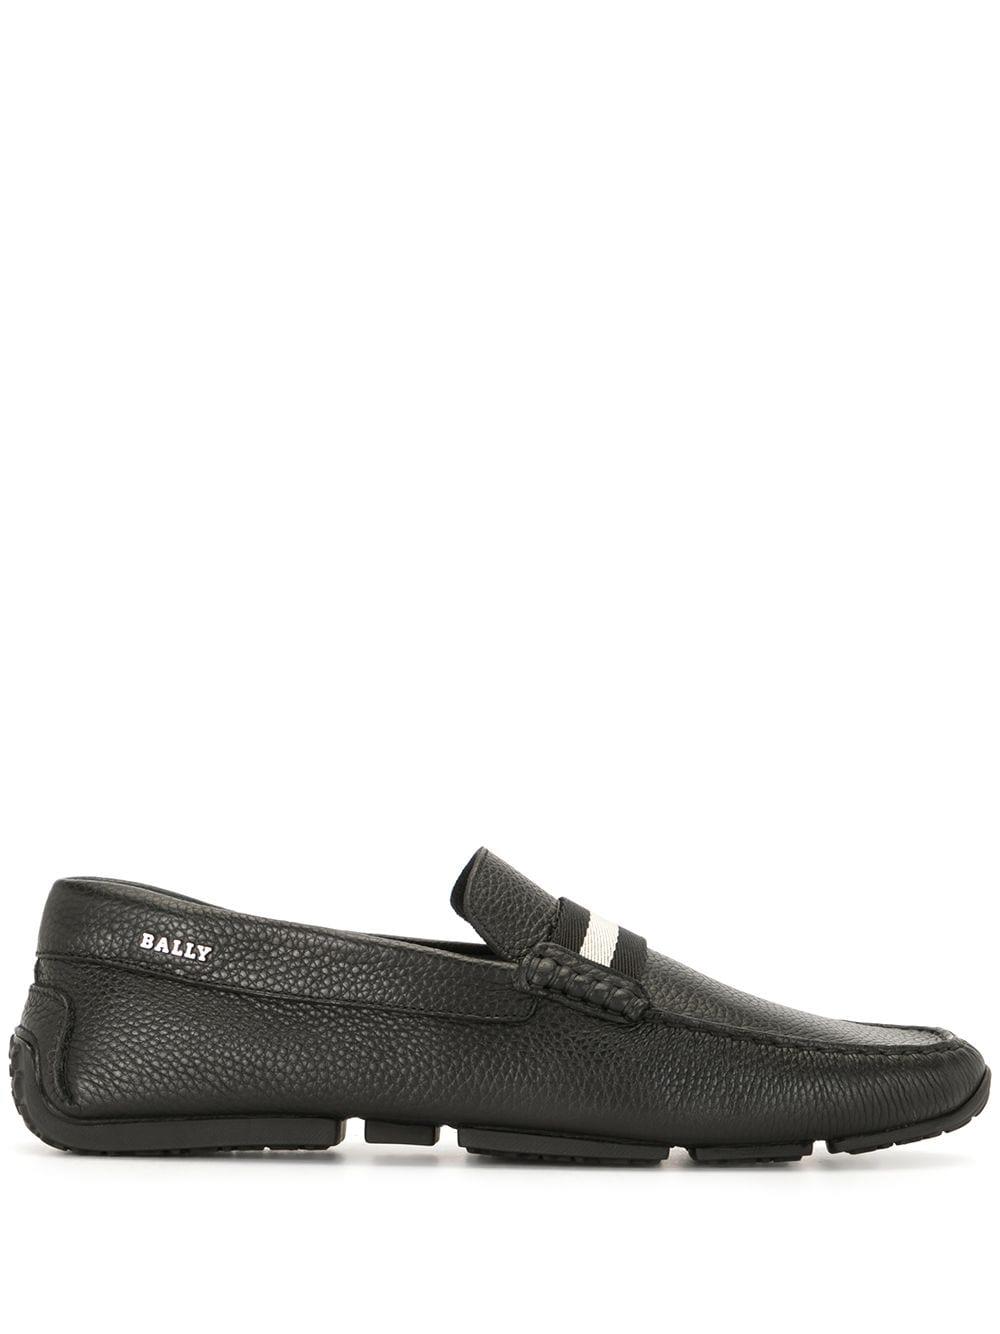 textured leather driving shoes by BALLY